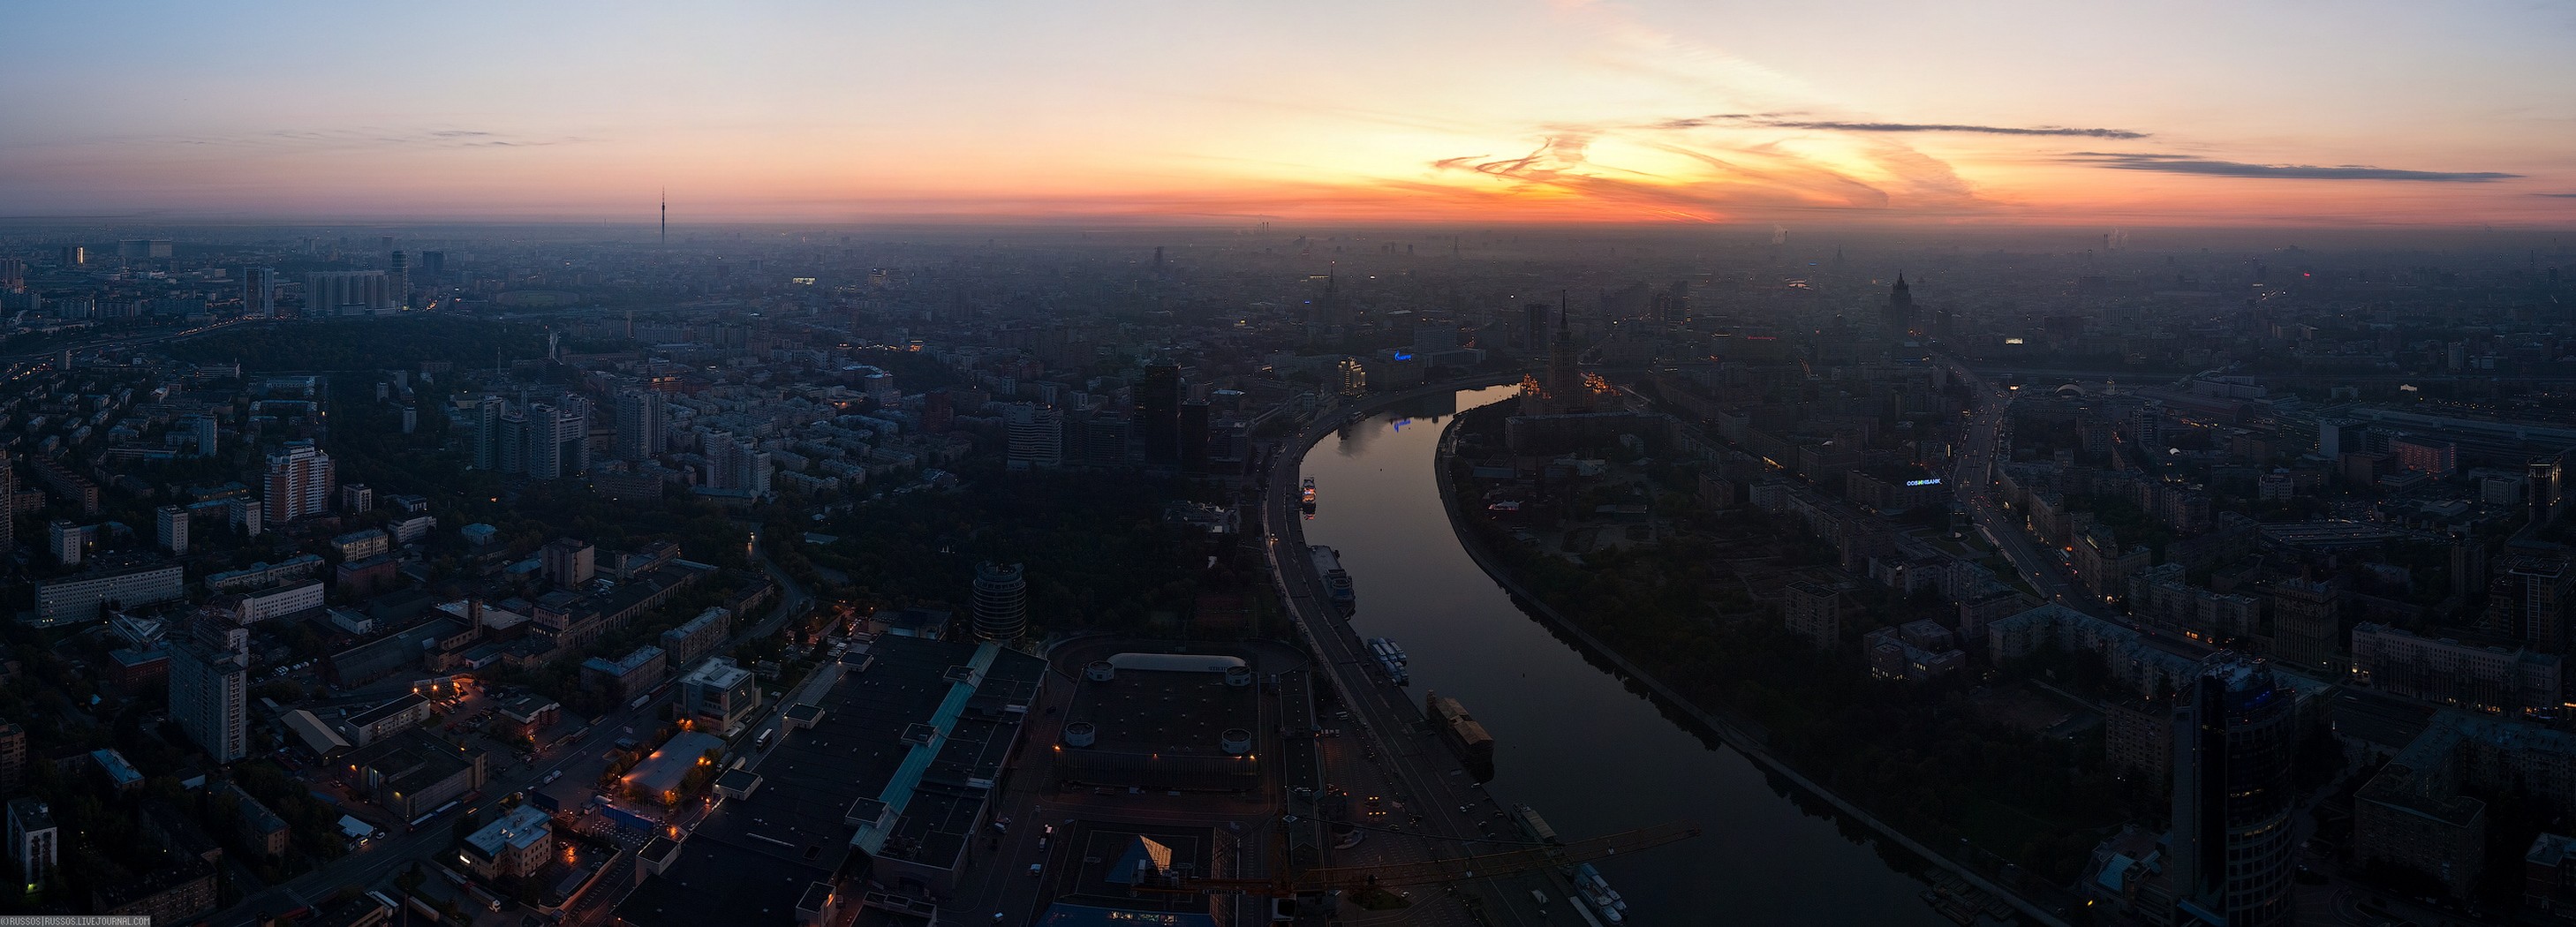 moscow river house morning sky panorama